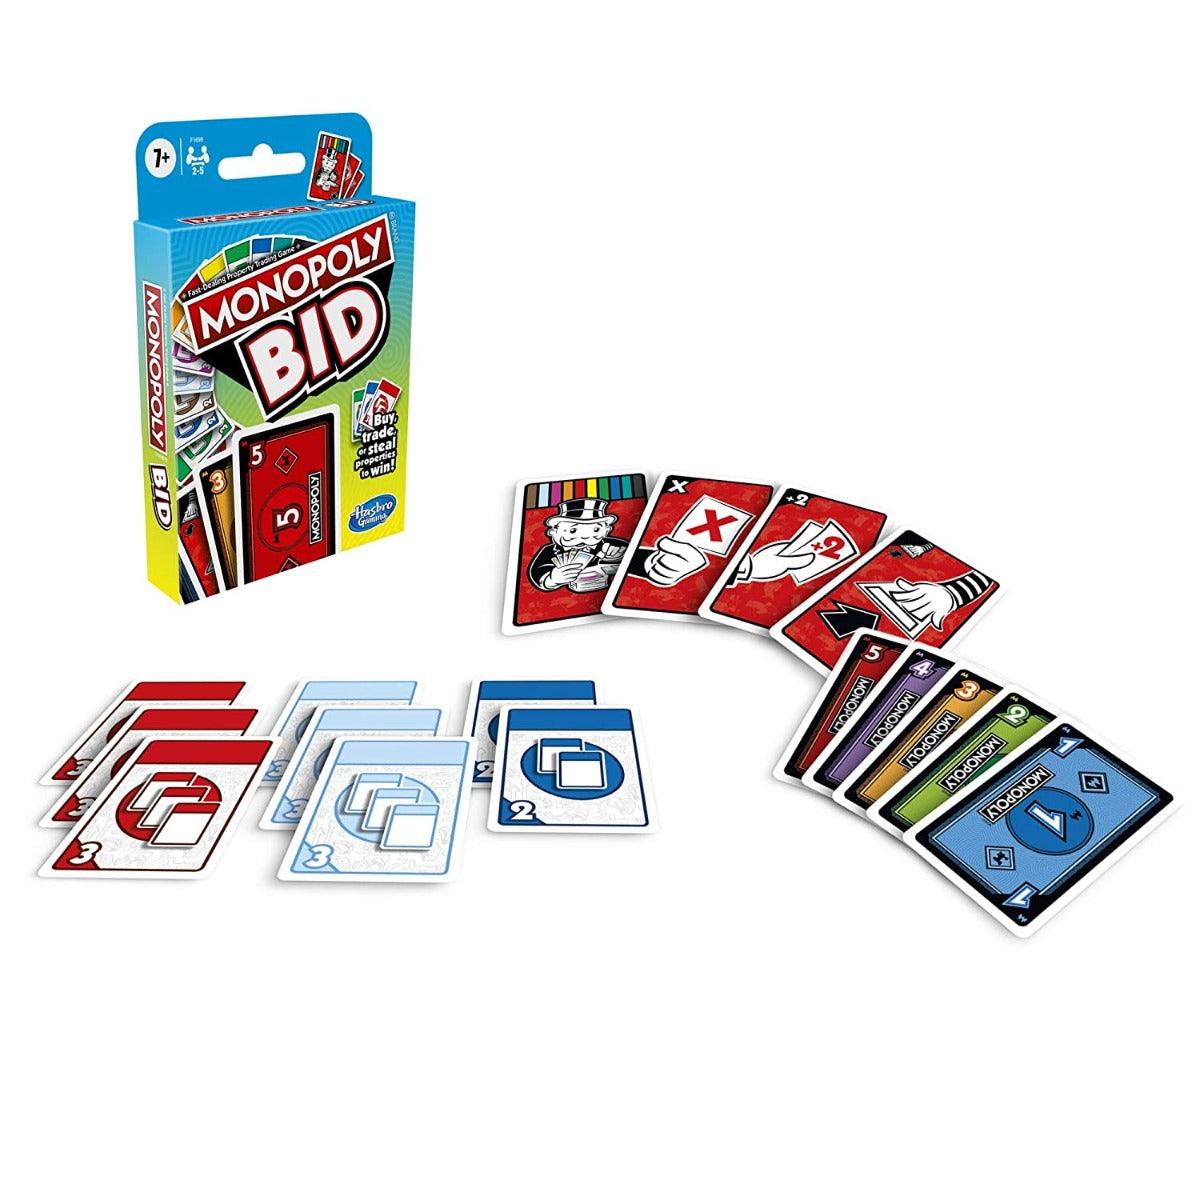 Monopoly Bid Game - Quick Playing Card Game for Families and Kids Ages 7 and Up